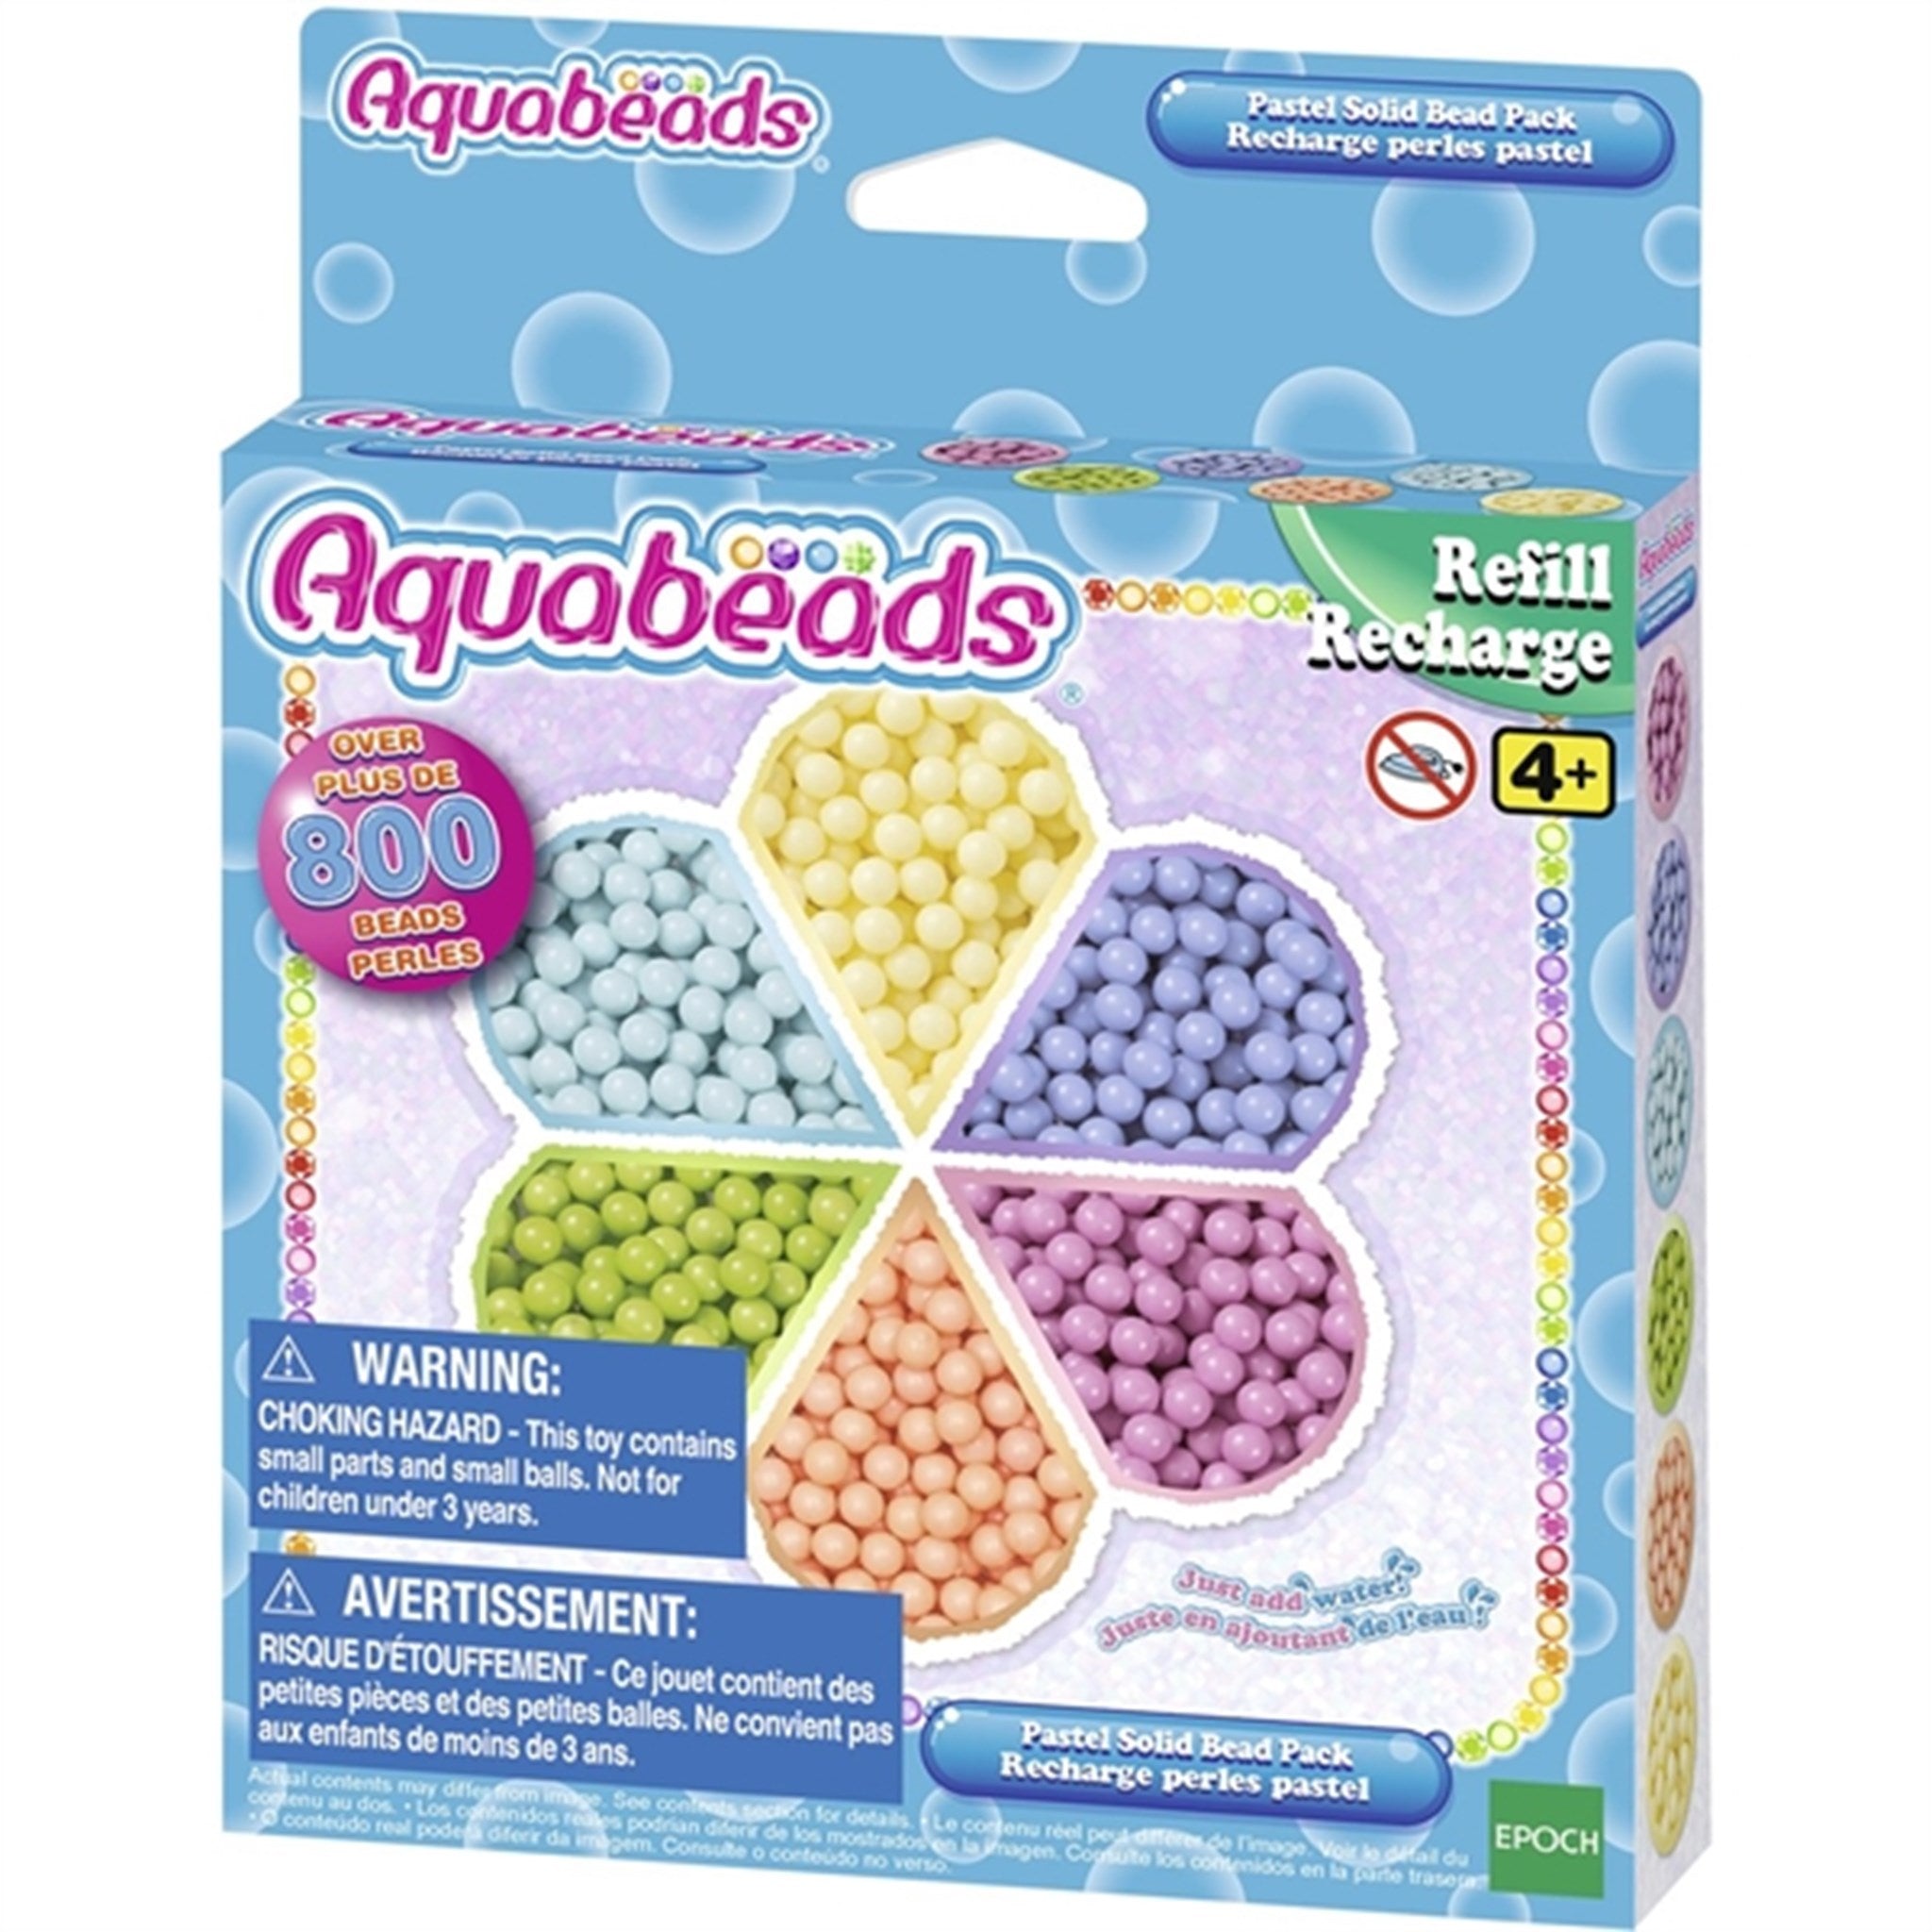 Pastel Solid Bead Pack - Aquabeads →